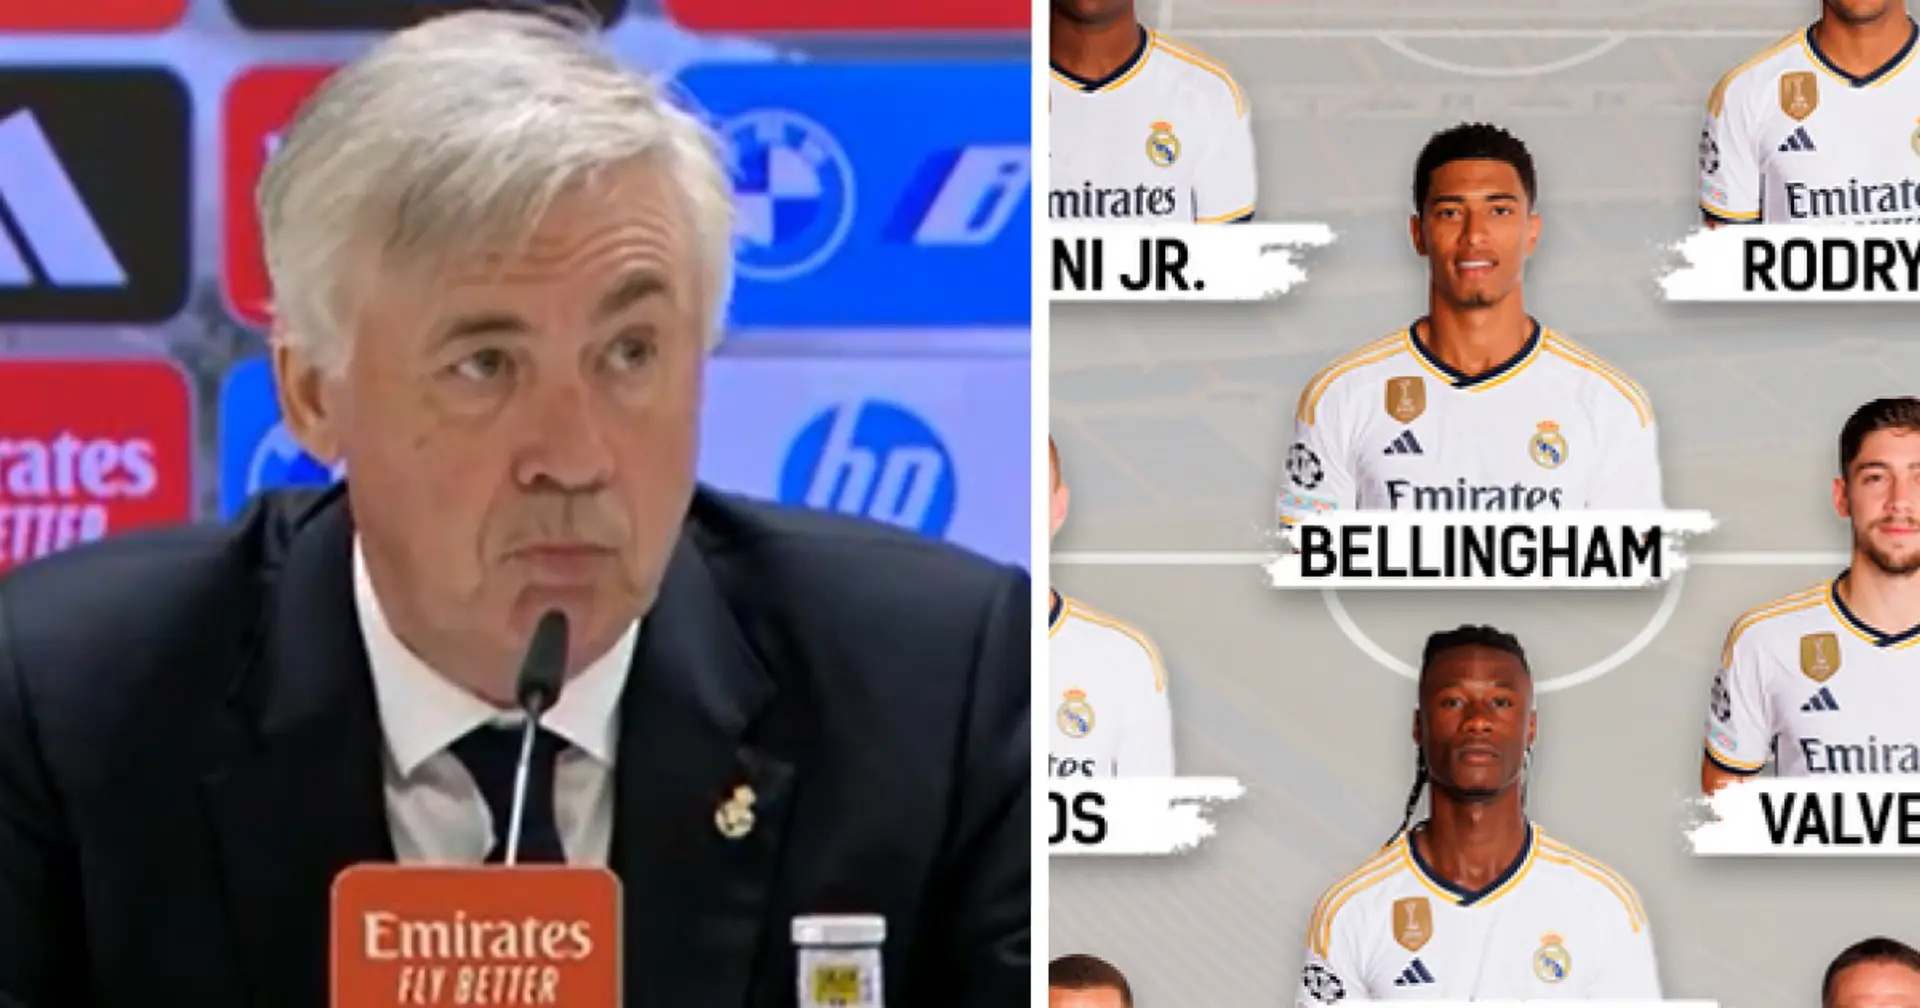 Ancelotti warned against repeating failed 'experiment' in Madrid derby